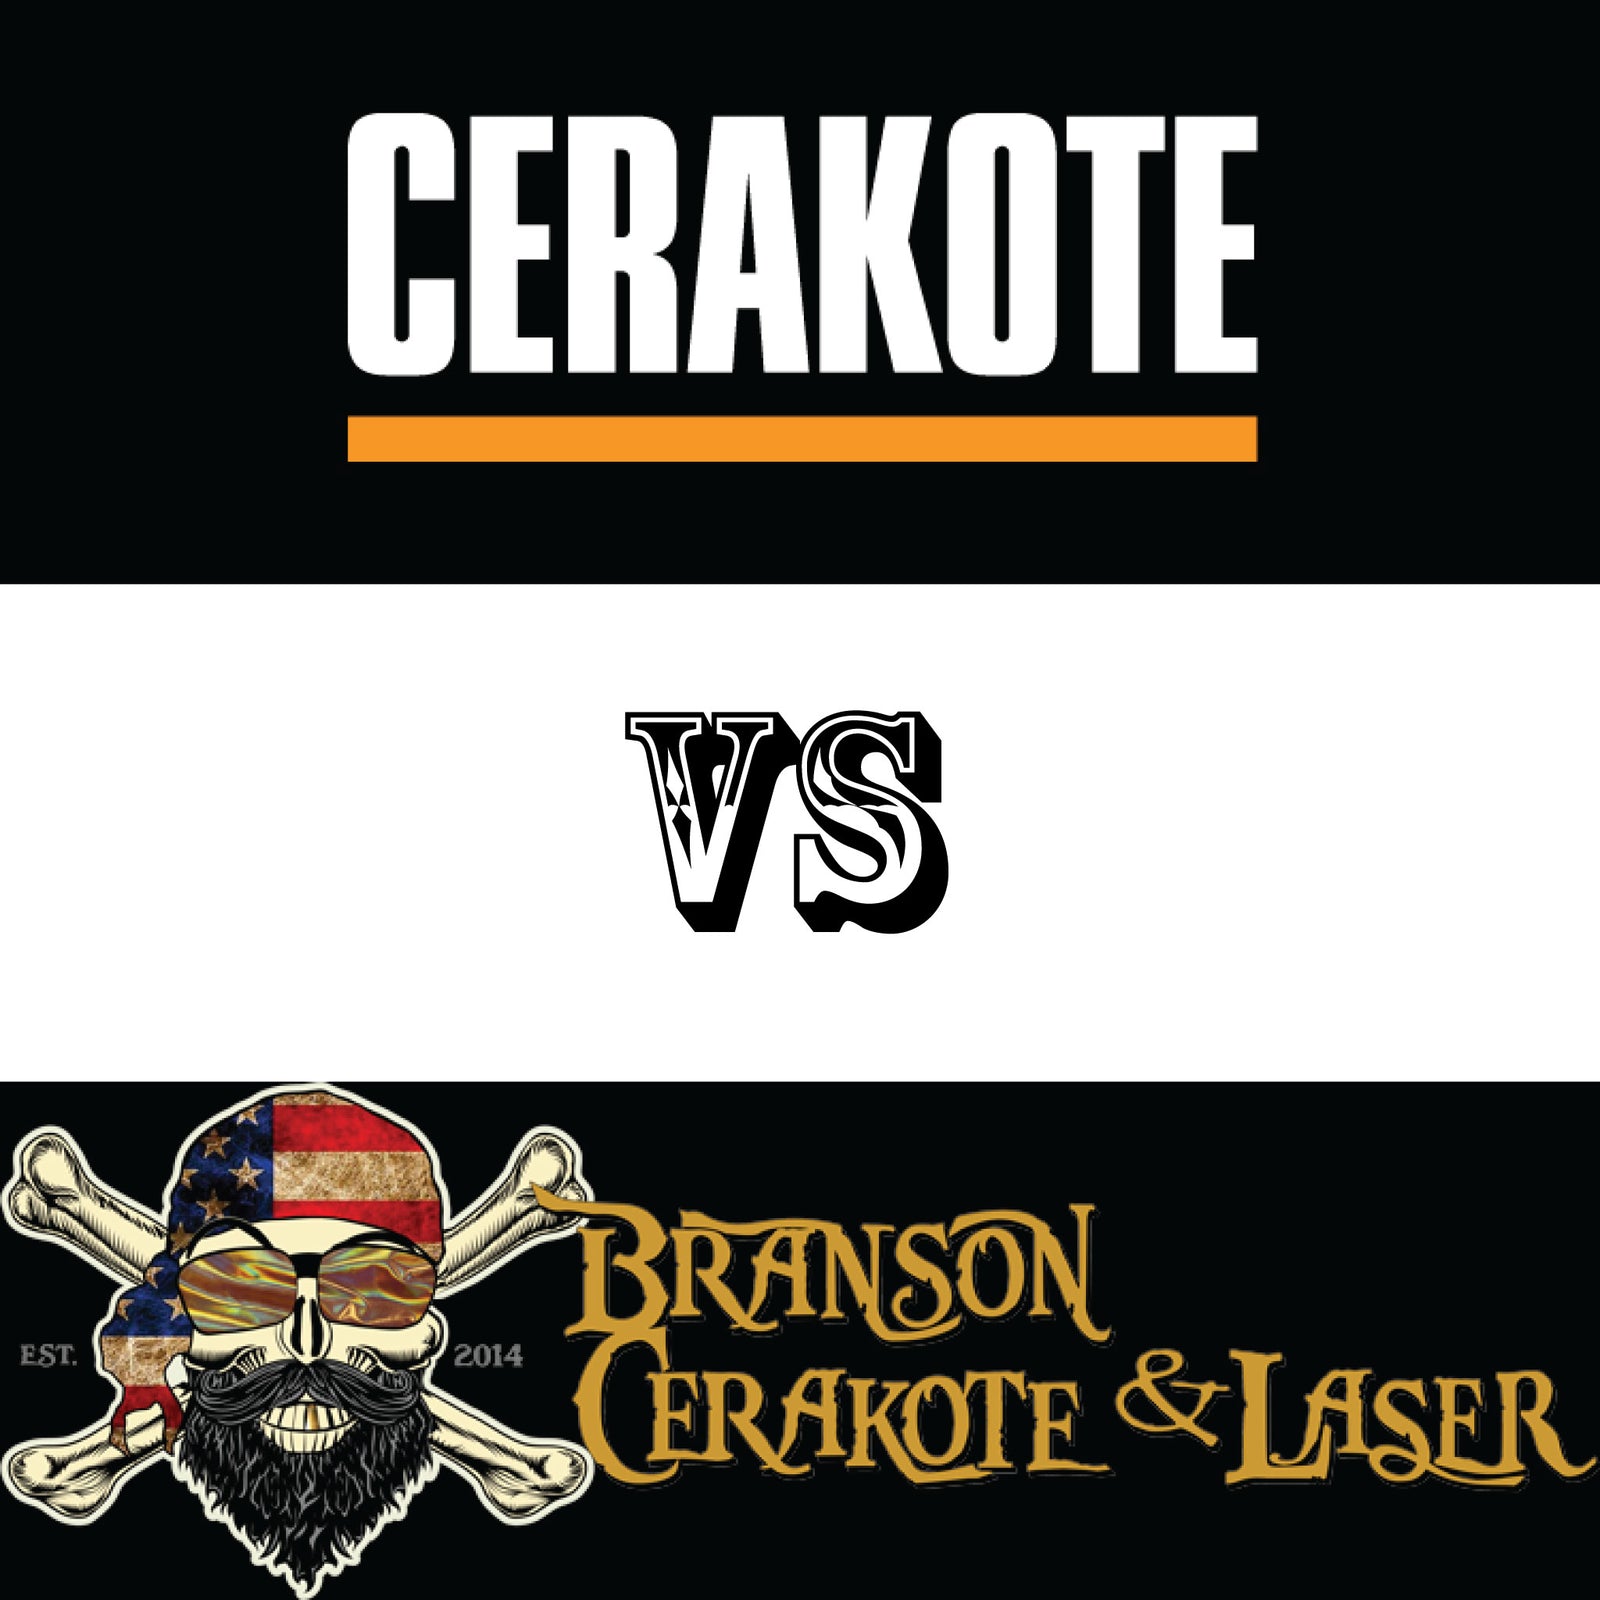 Learn How To Cerakote: Where To Go